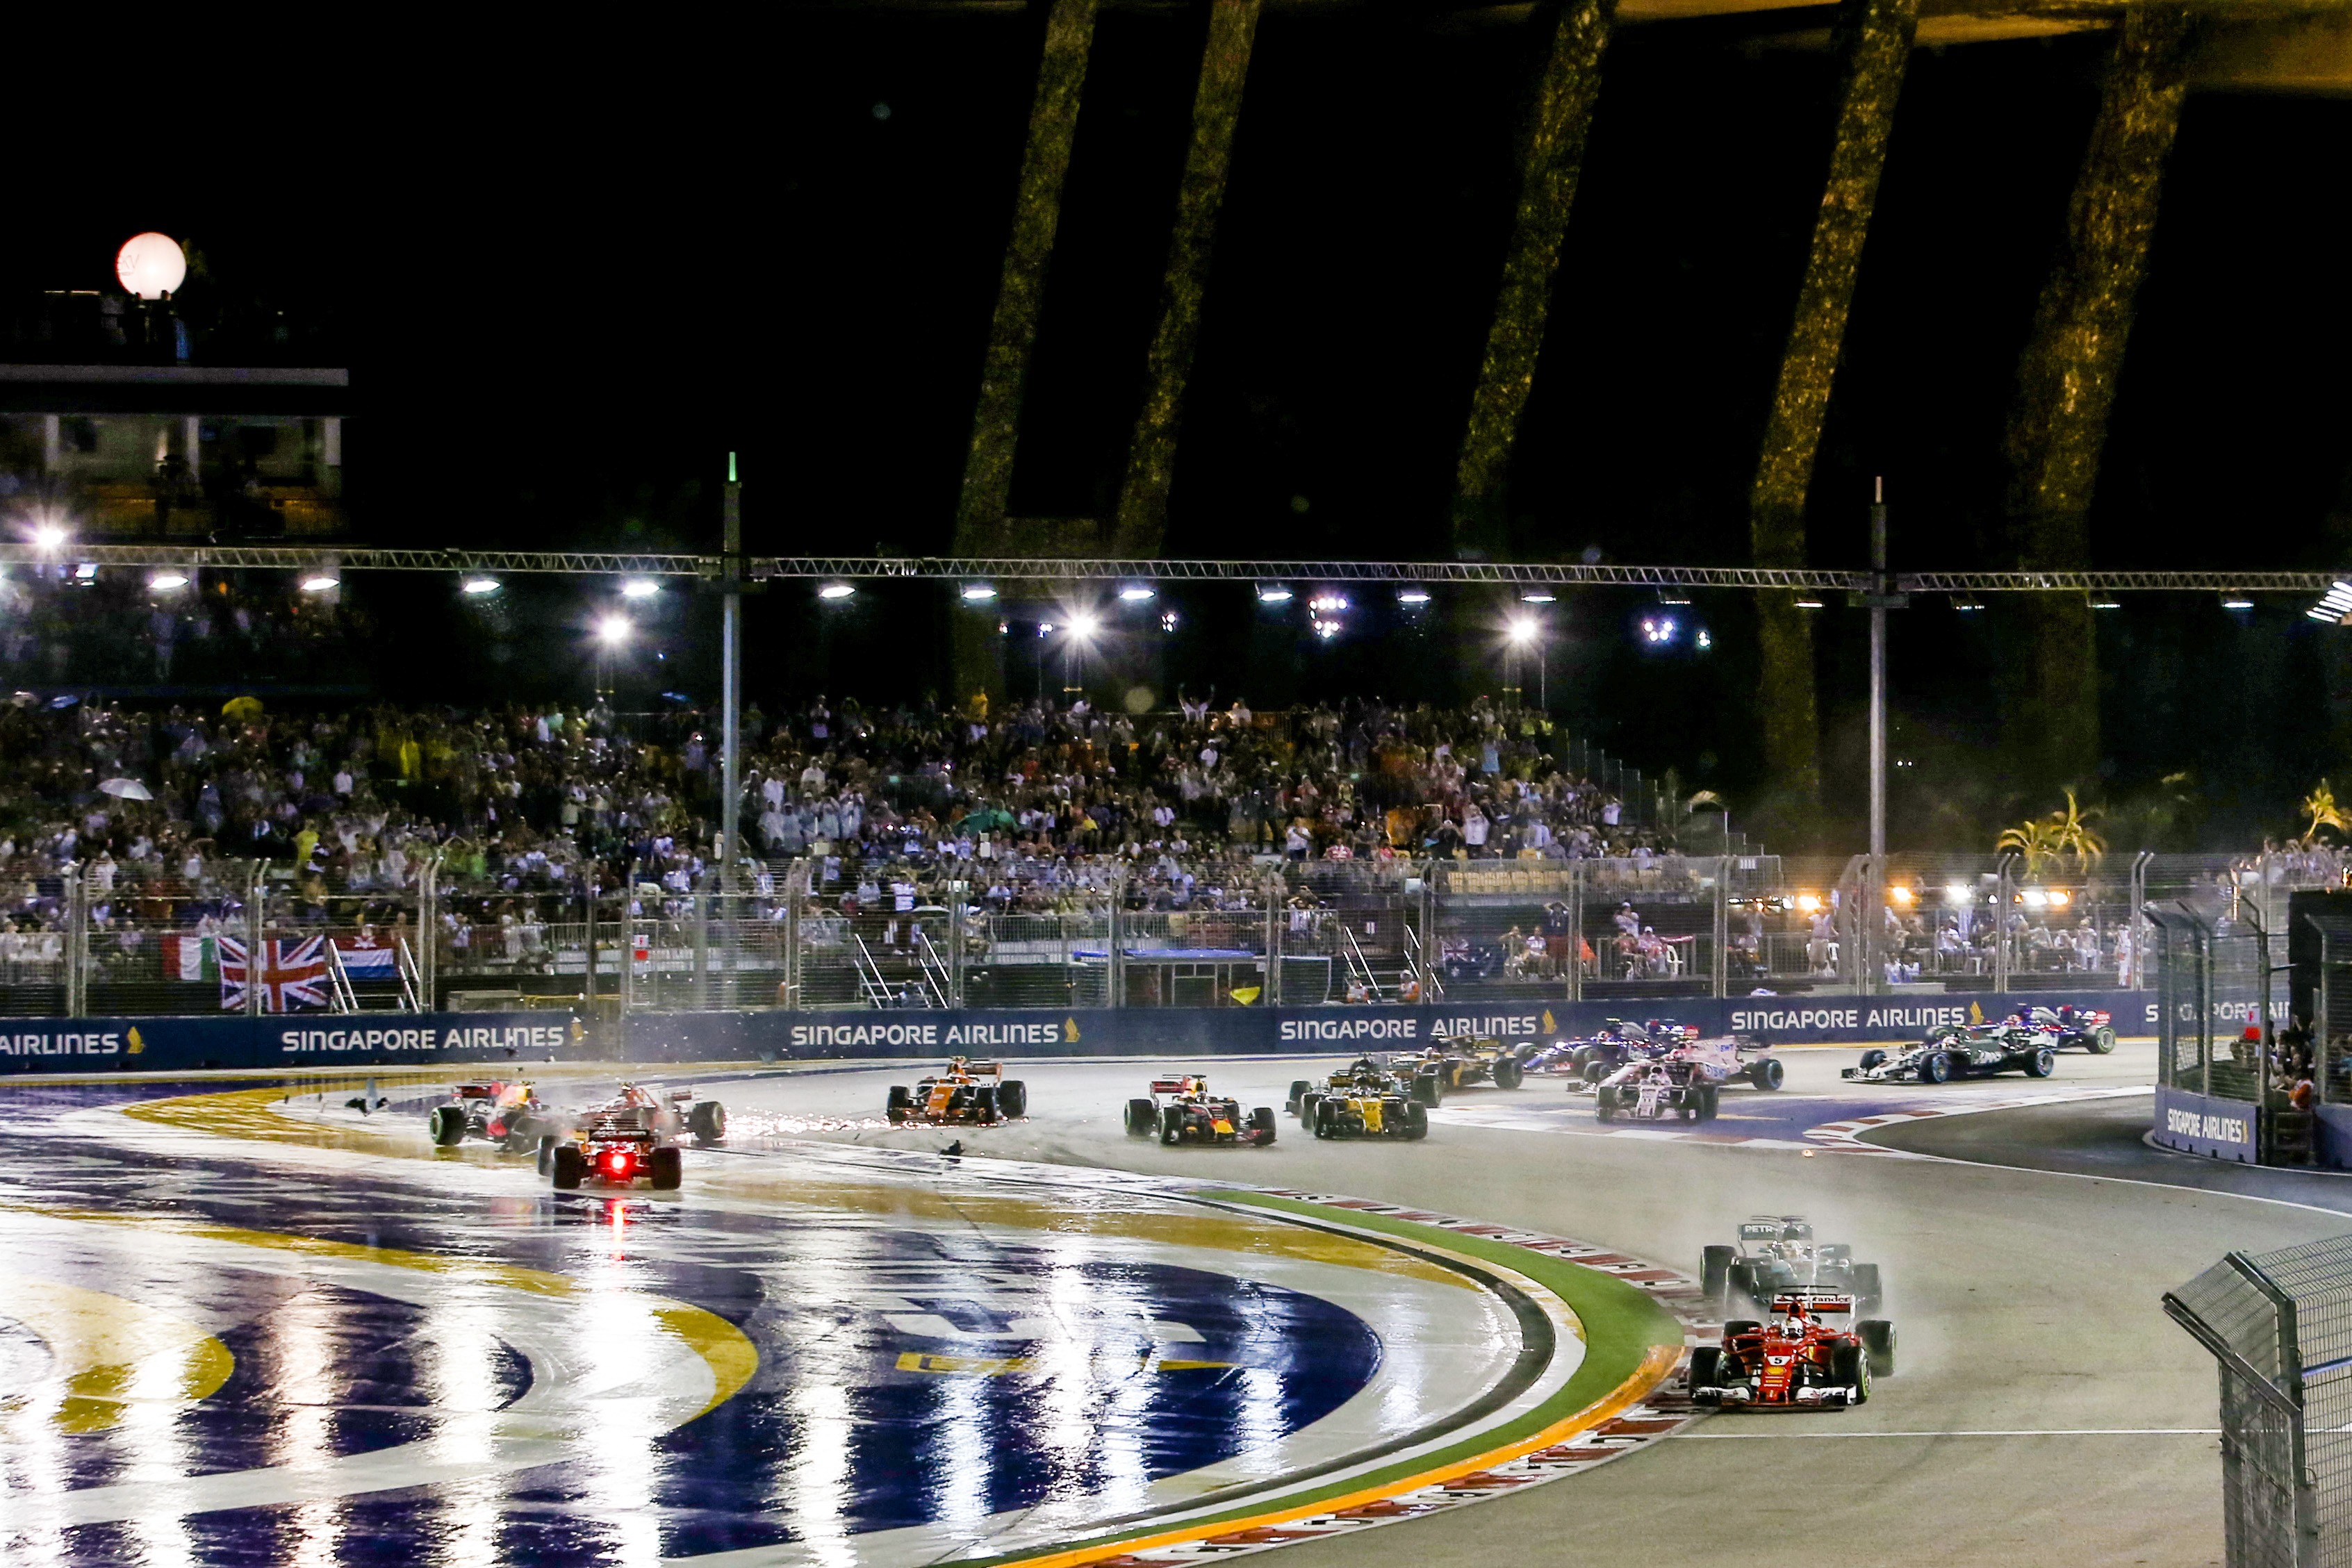 The Singapore Grand Prix has boosted the city state’s tourism sector with world-class motor racing, concerts and many other off-track events since 2007. Photo: Singapore Grand Prix